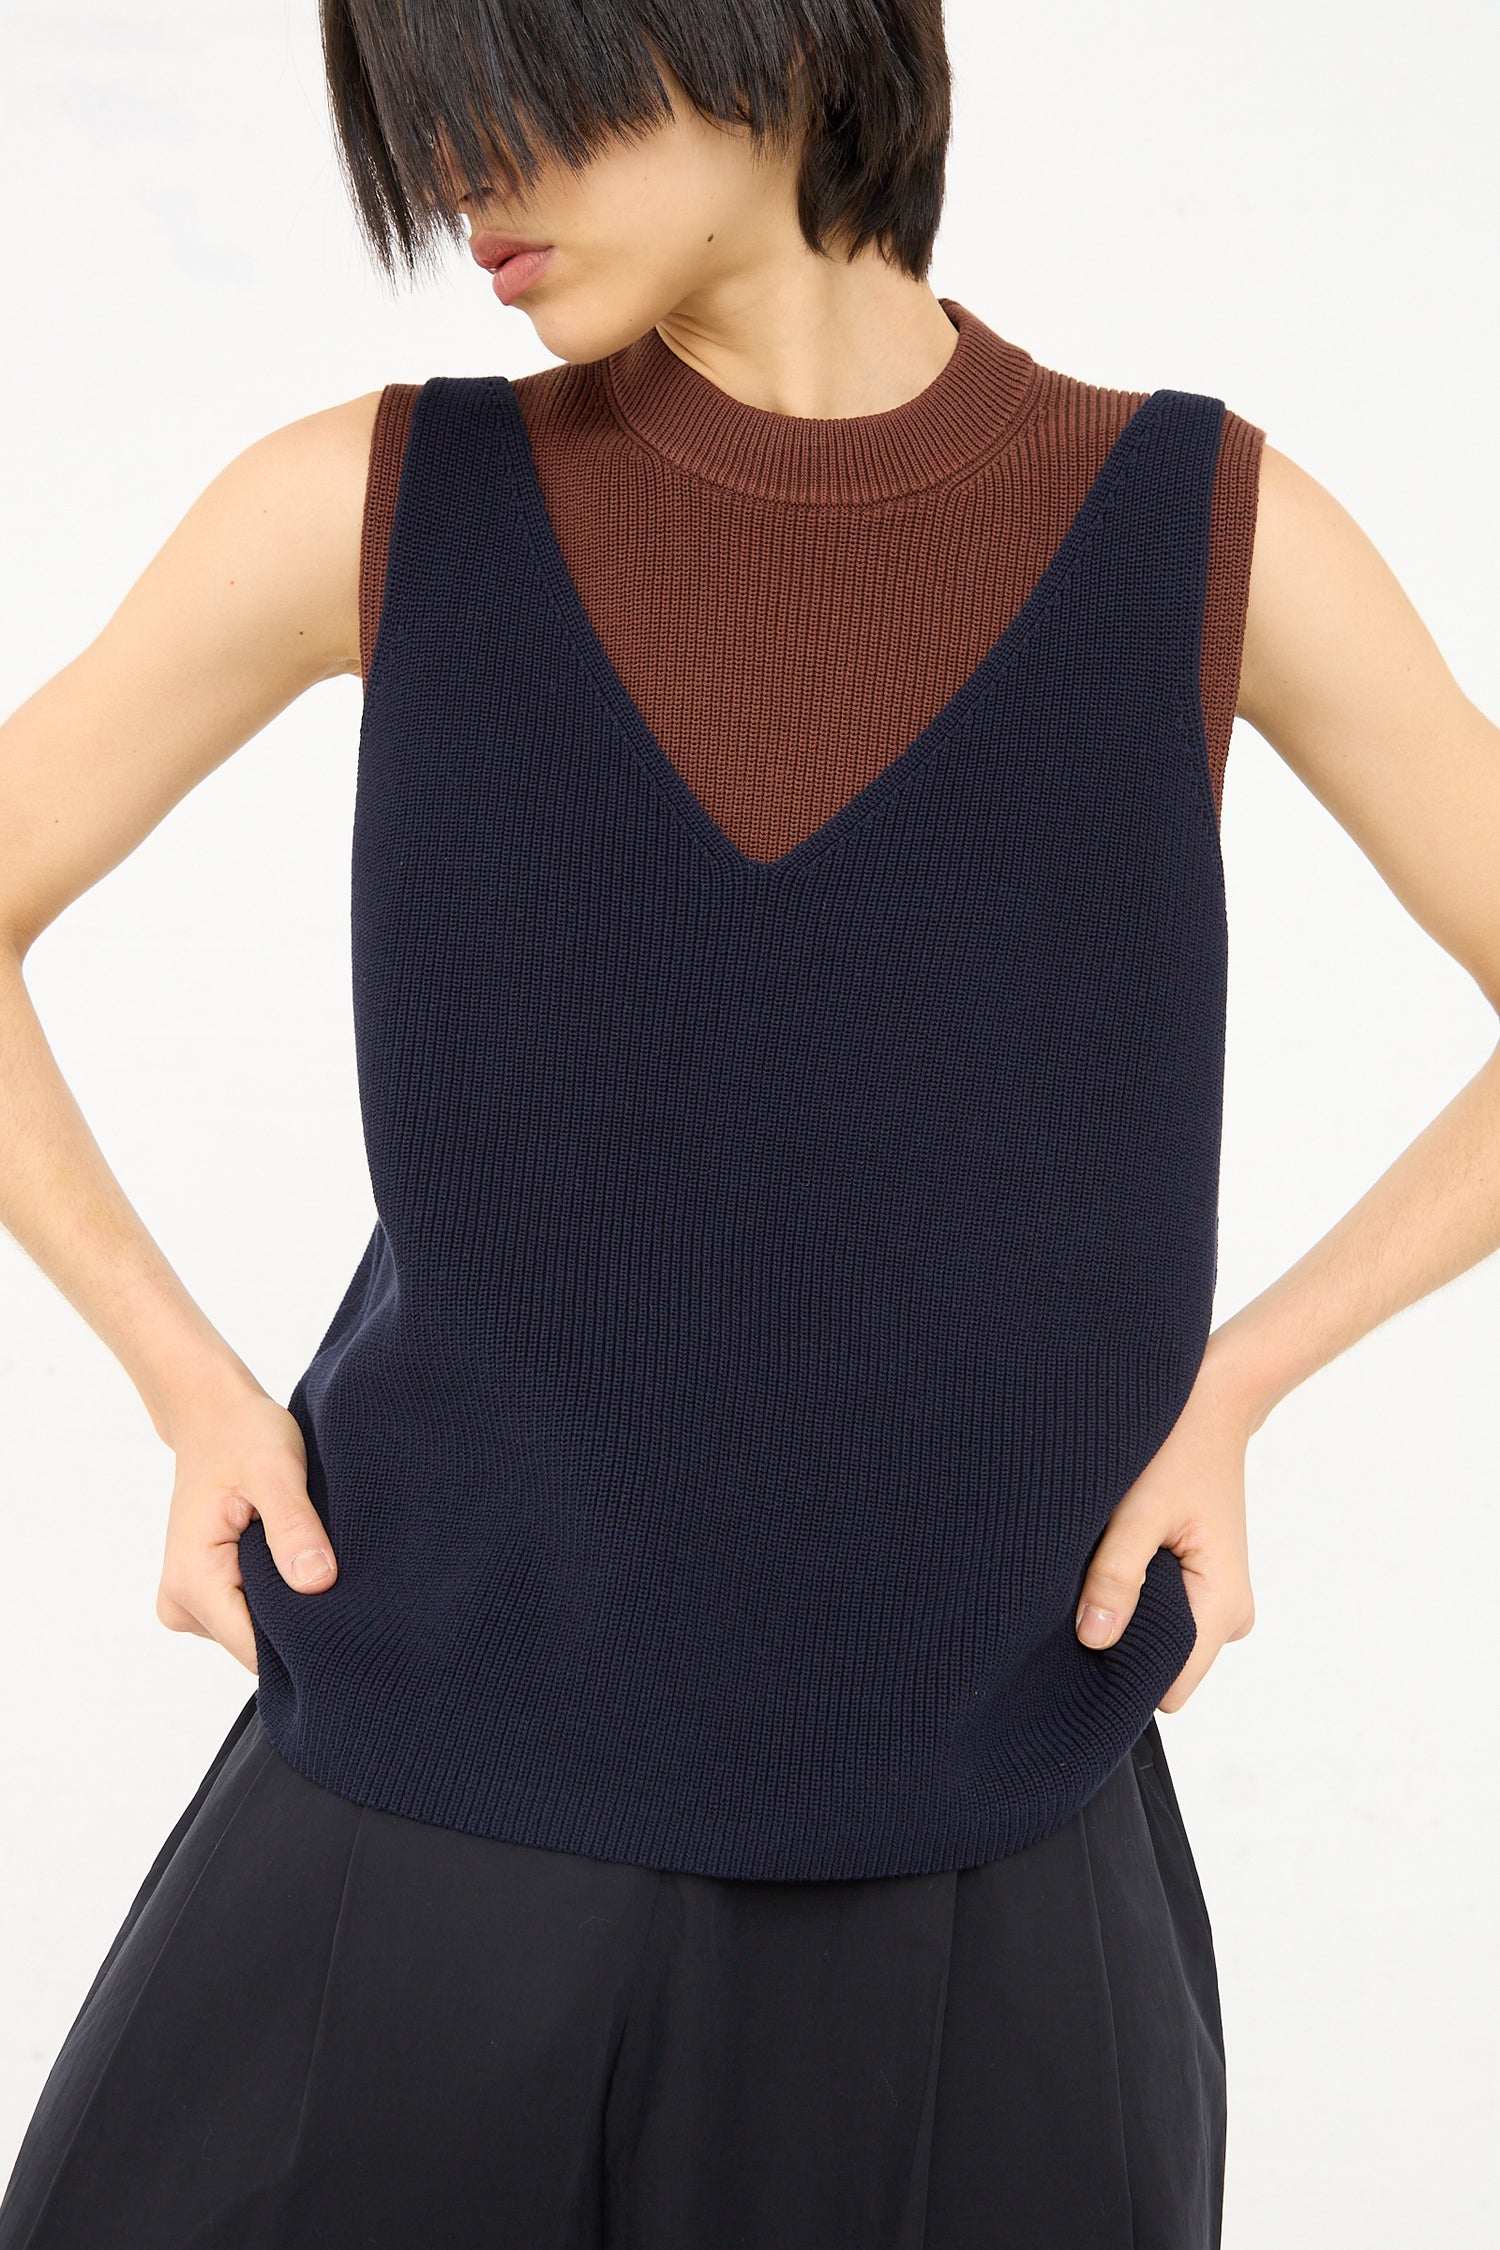 A person wearing a layered outfit with a sleeveless deep V Studio Nicholson Darkest Navy Bara Knit Rib Top over a brown turtleneck, hands casually placed in the pockets of a black garment.